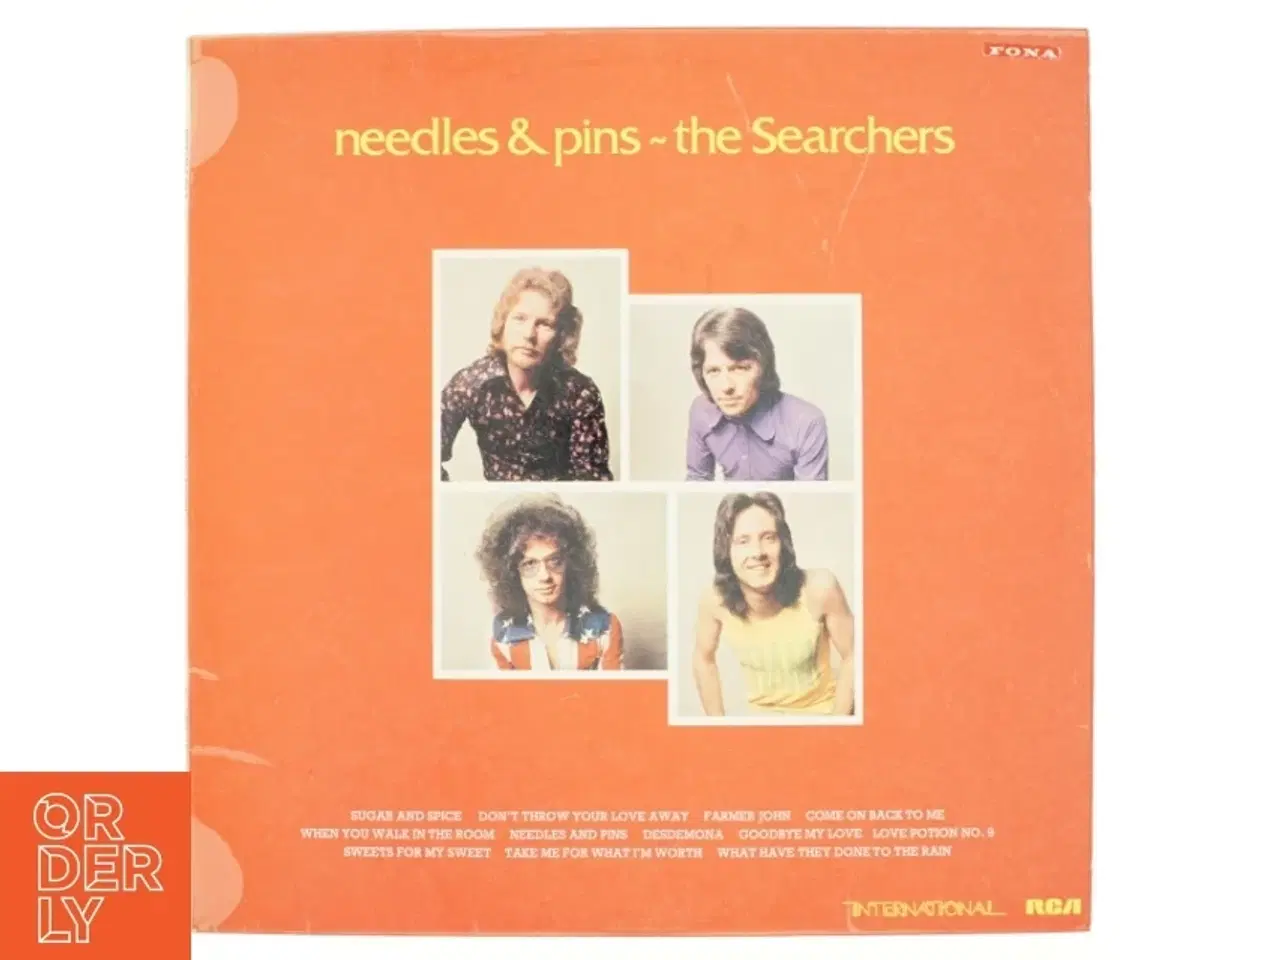 Billede 1 - Needles&Pins, The Searchers